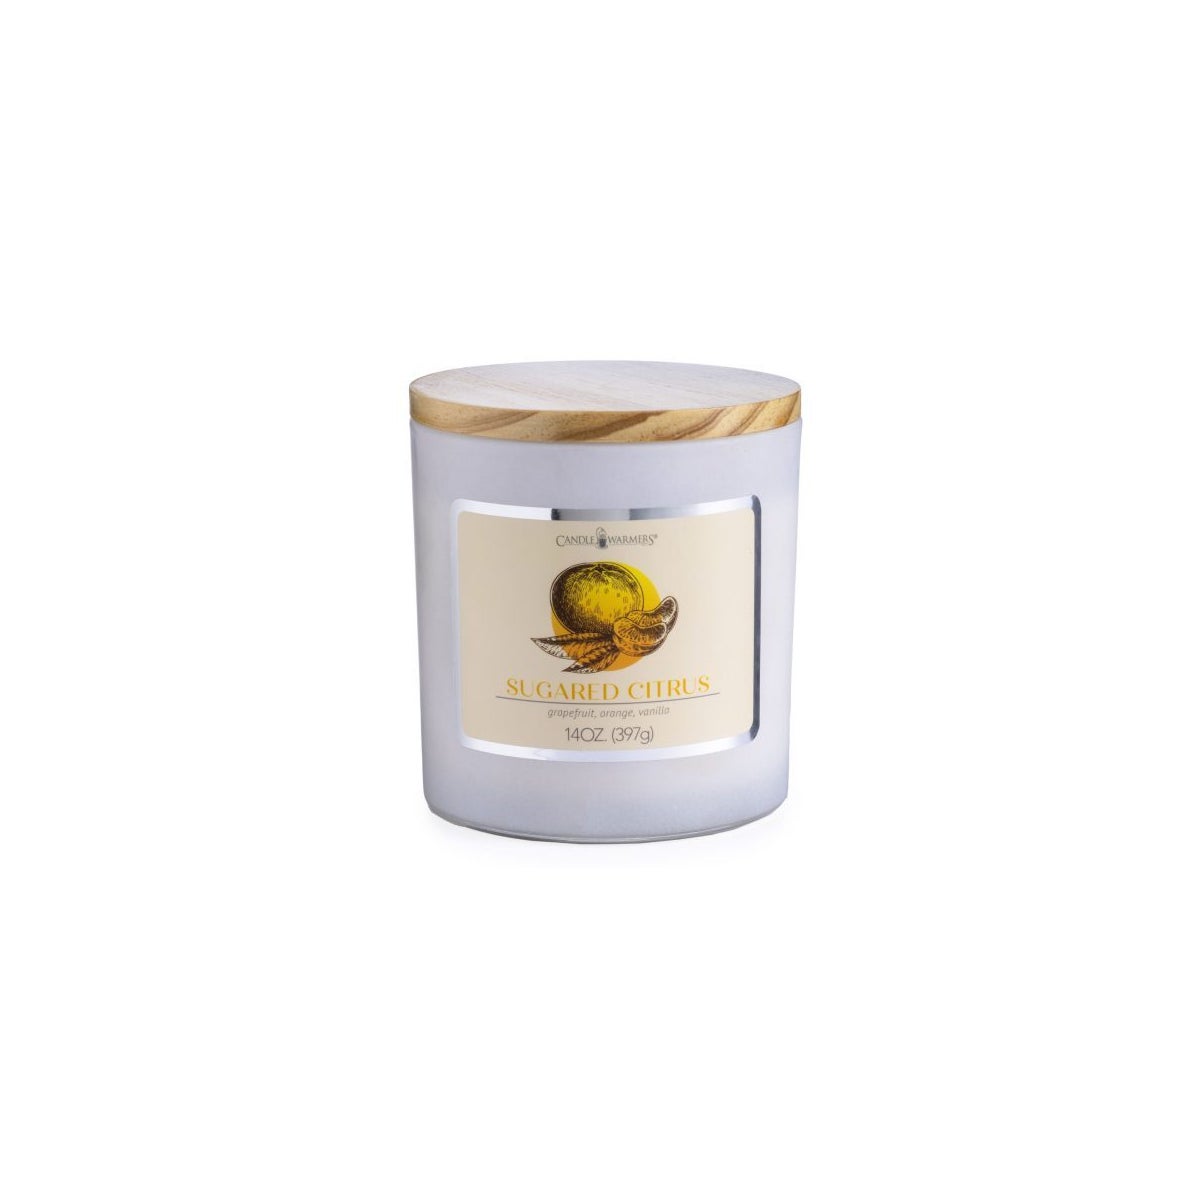 Limited Edition Spring Candle 14 oz - Sugared Citrus